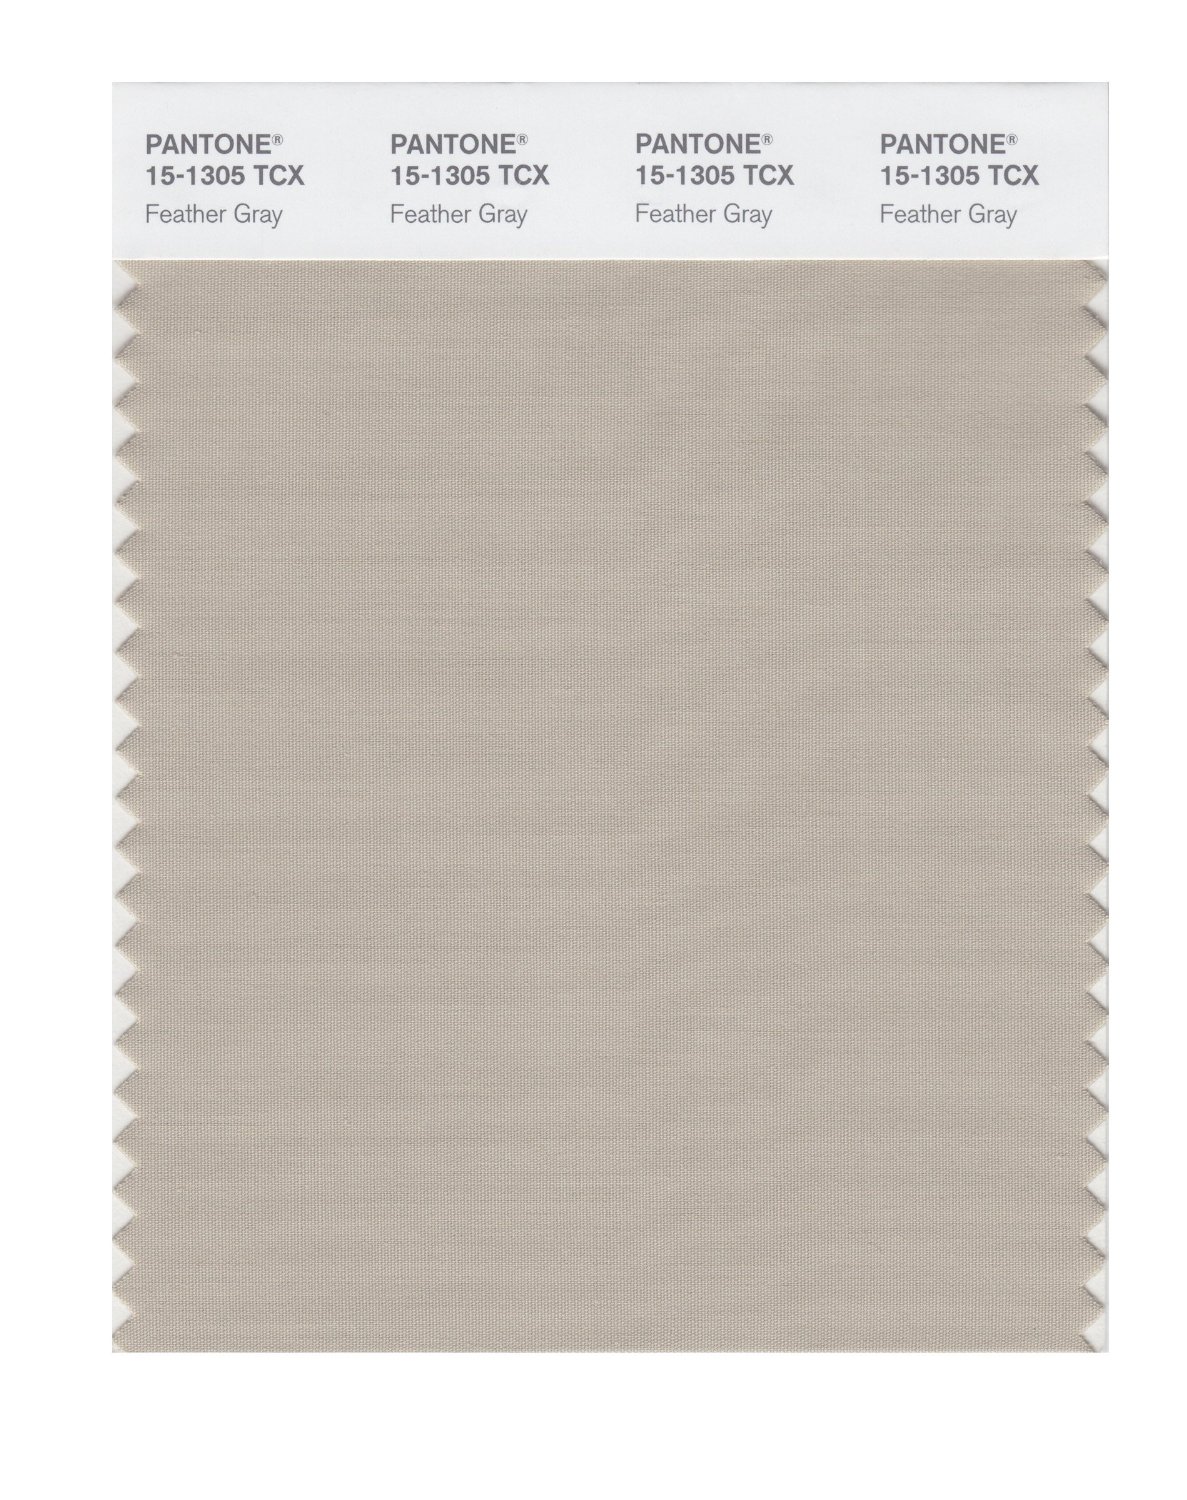 Pantone Cotton Swatch 15-1305 Feather Gray